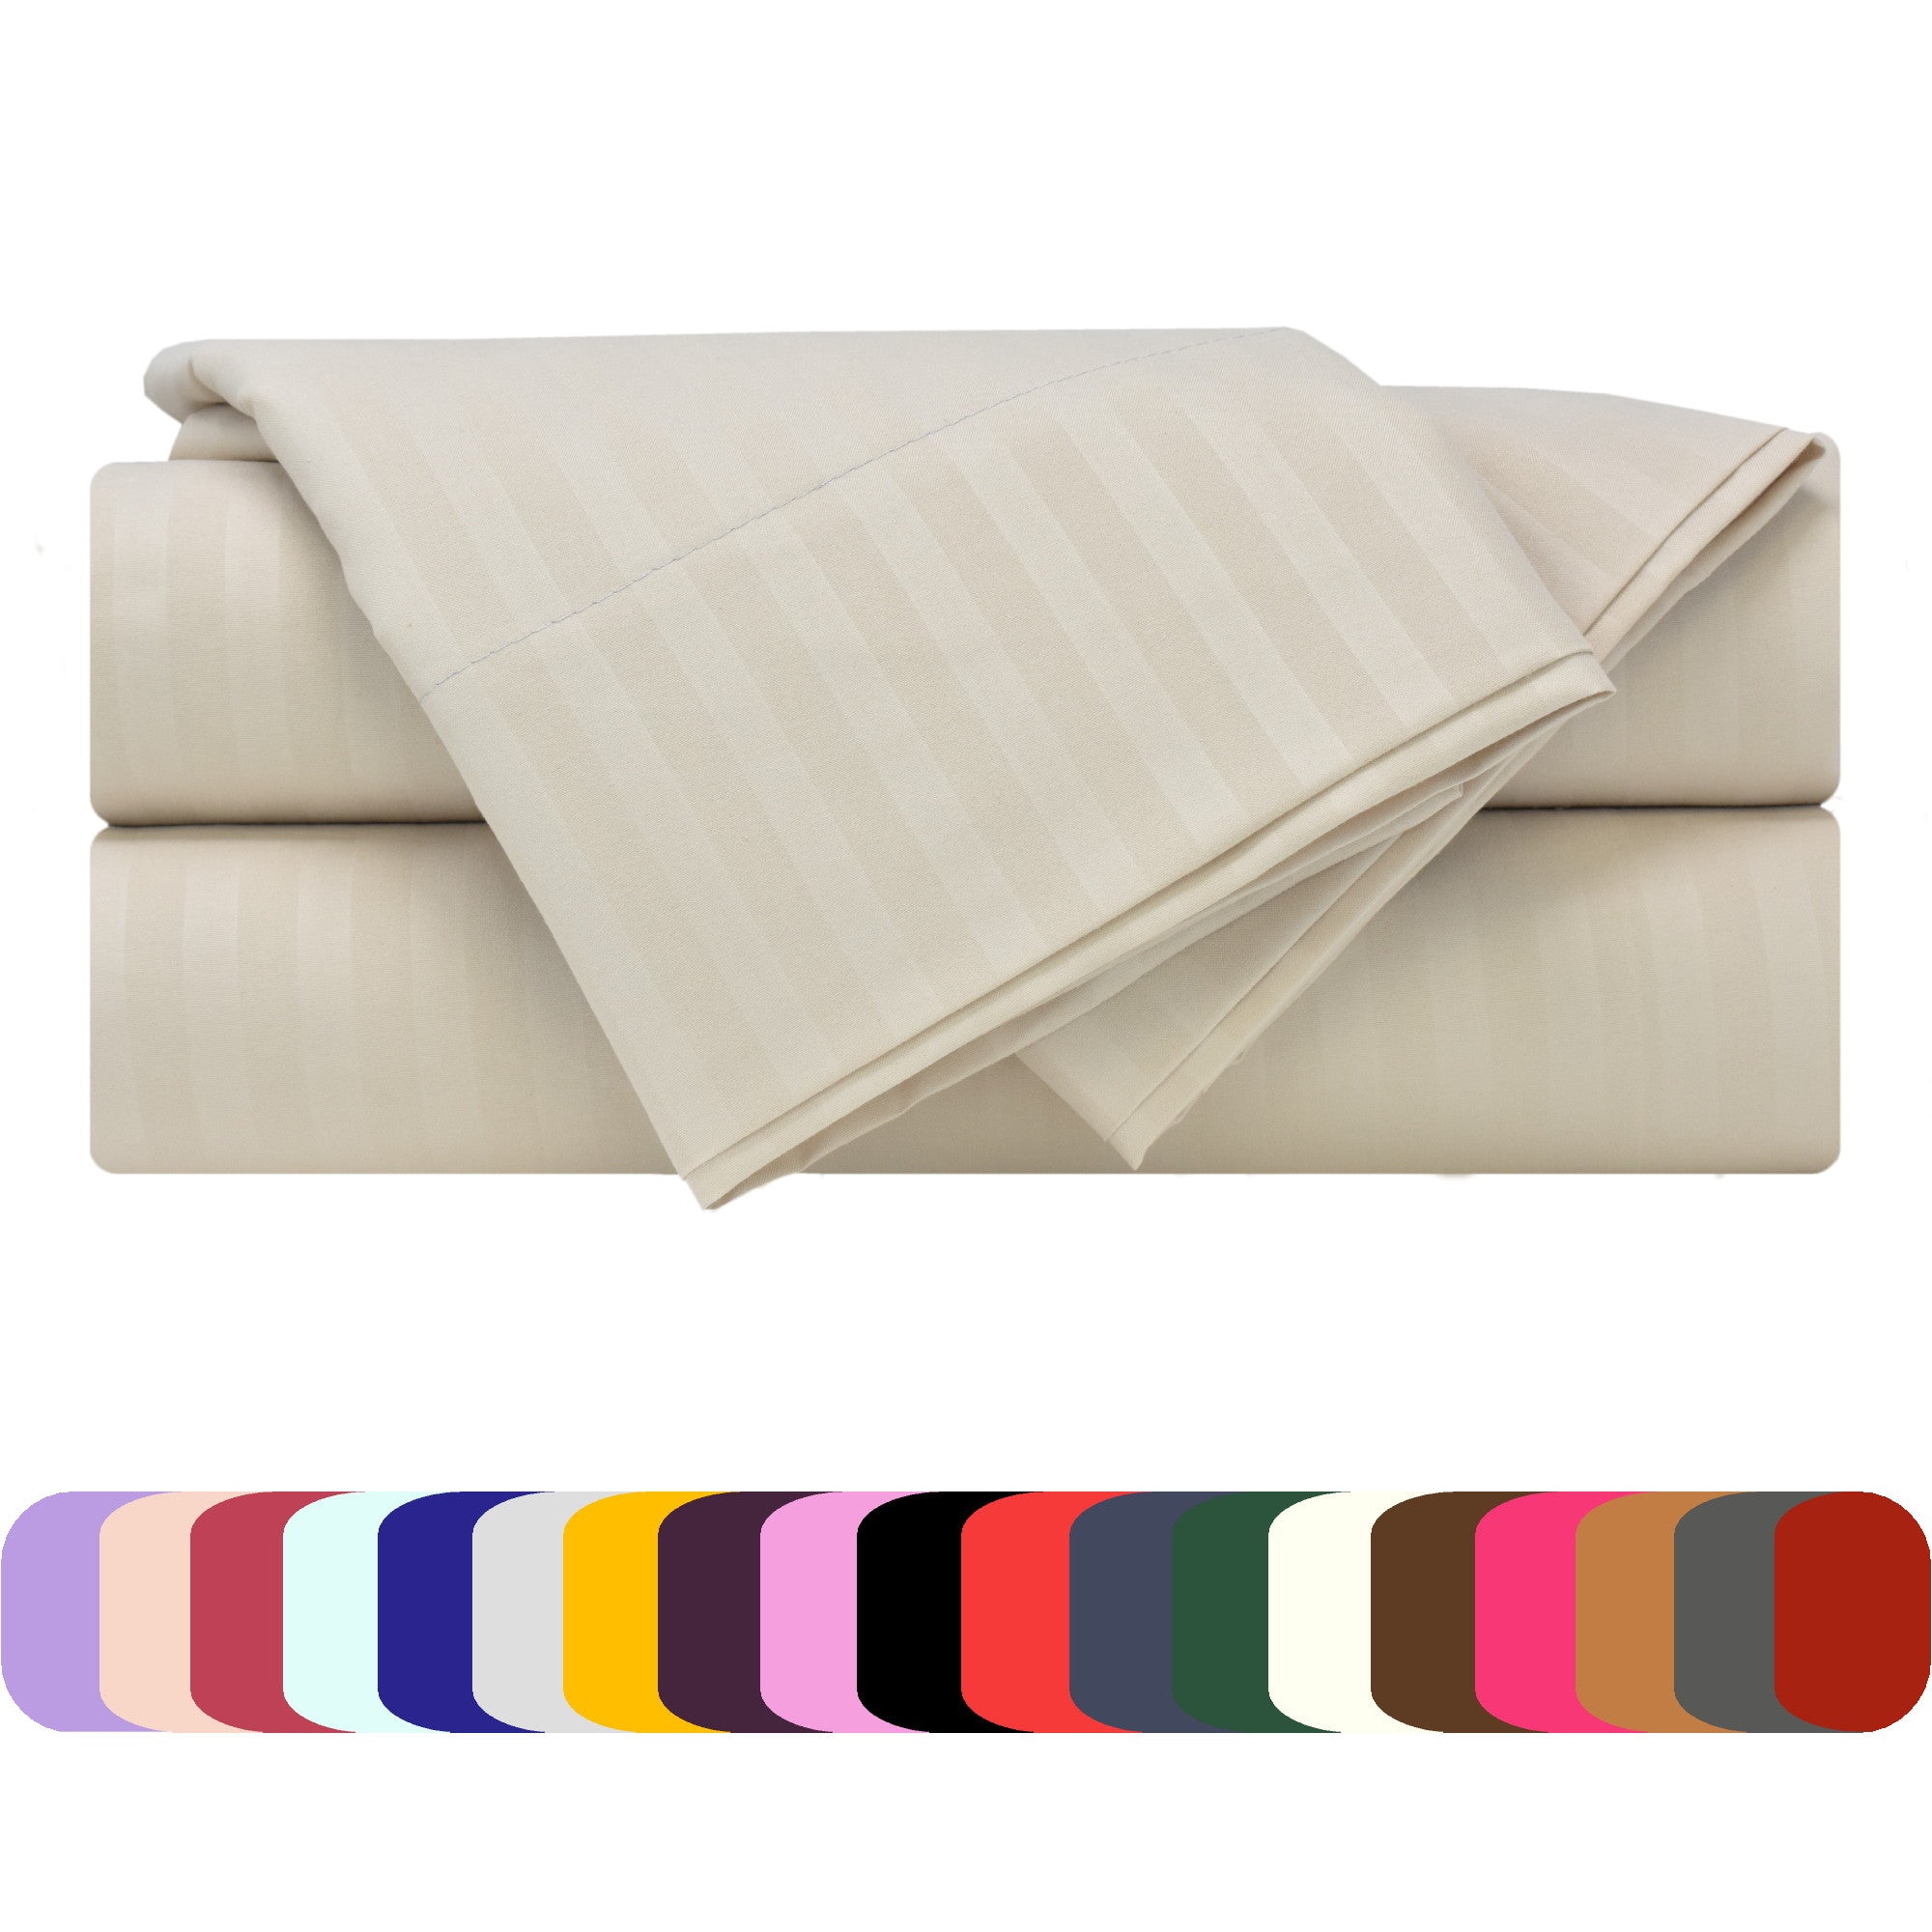 Bed Sheet Set - Striped Colors - Soft and Comfortable 1800